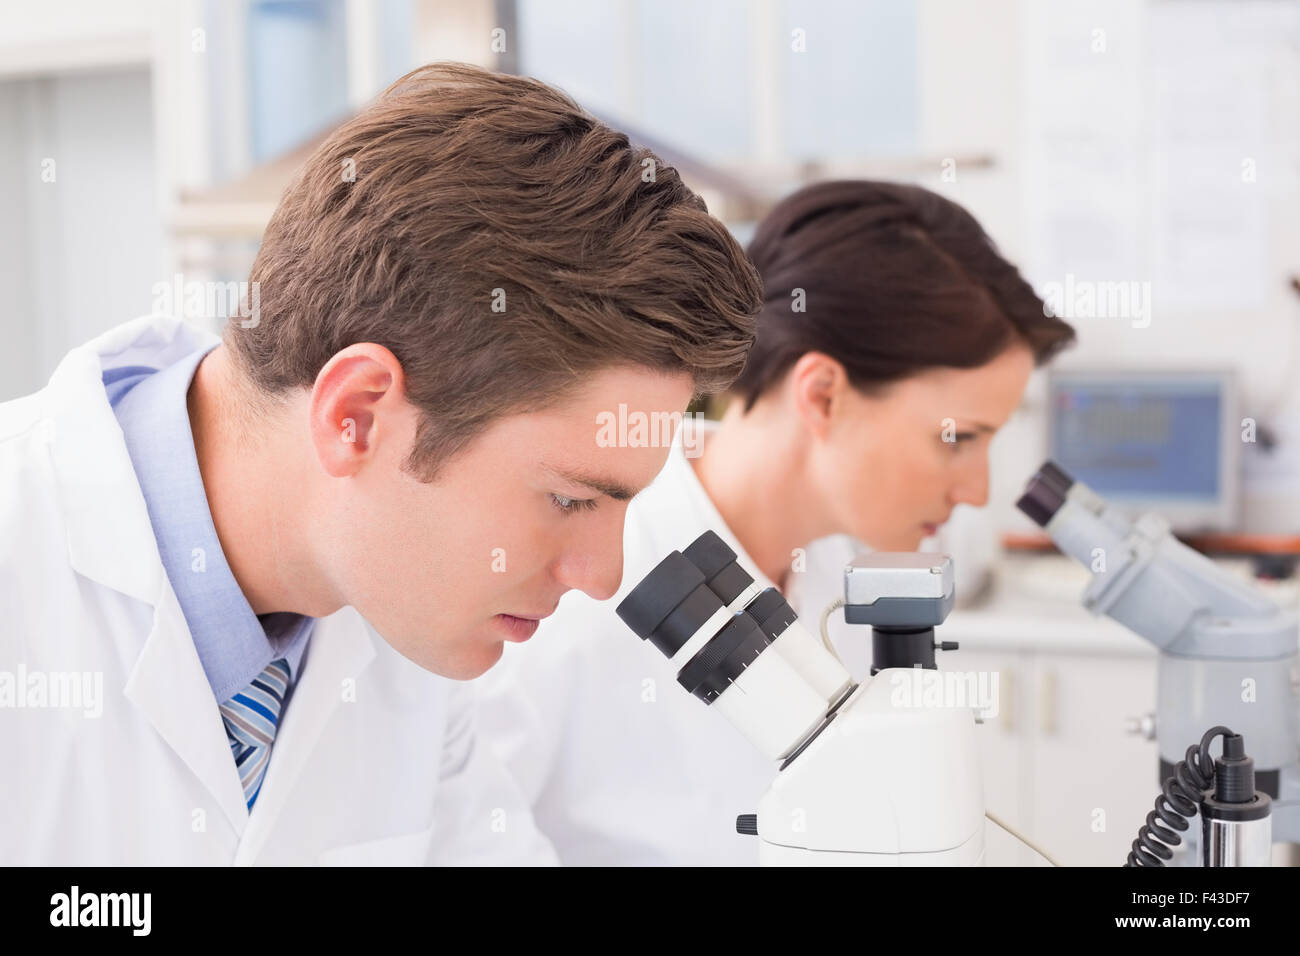 Scientists looking attentively in microscopes Stock Photo